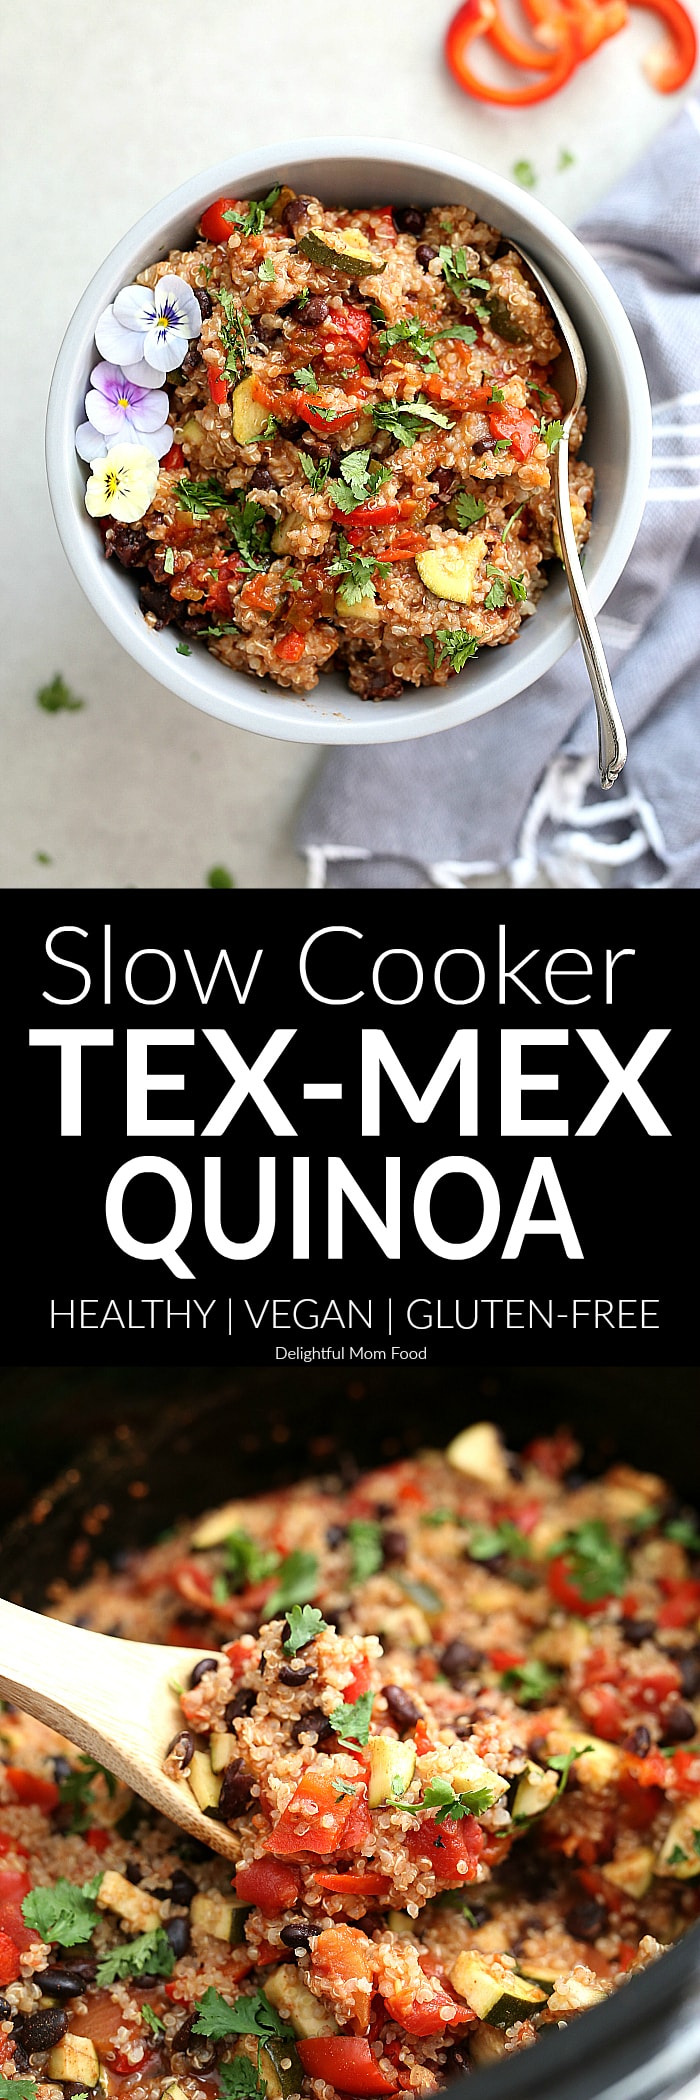 One pan Mexican quinoa recipe that takes only minutes to put together. Hearty flavors of quinoa, black beans and vegetables embodied with tex mex spices that simmer a few hours in the slow cooker and are ready to enjoy in the evening. A stress-free  vegan and gluten-free dinner waiting to be devoured! #texmex #mexican #quinoa #vegetarian #healthy #recipe #vegan #glutenfree | recipe at delightfulmomfood.com